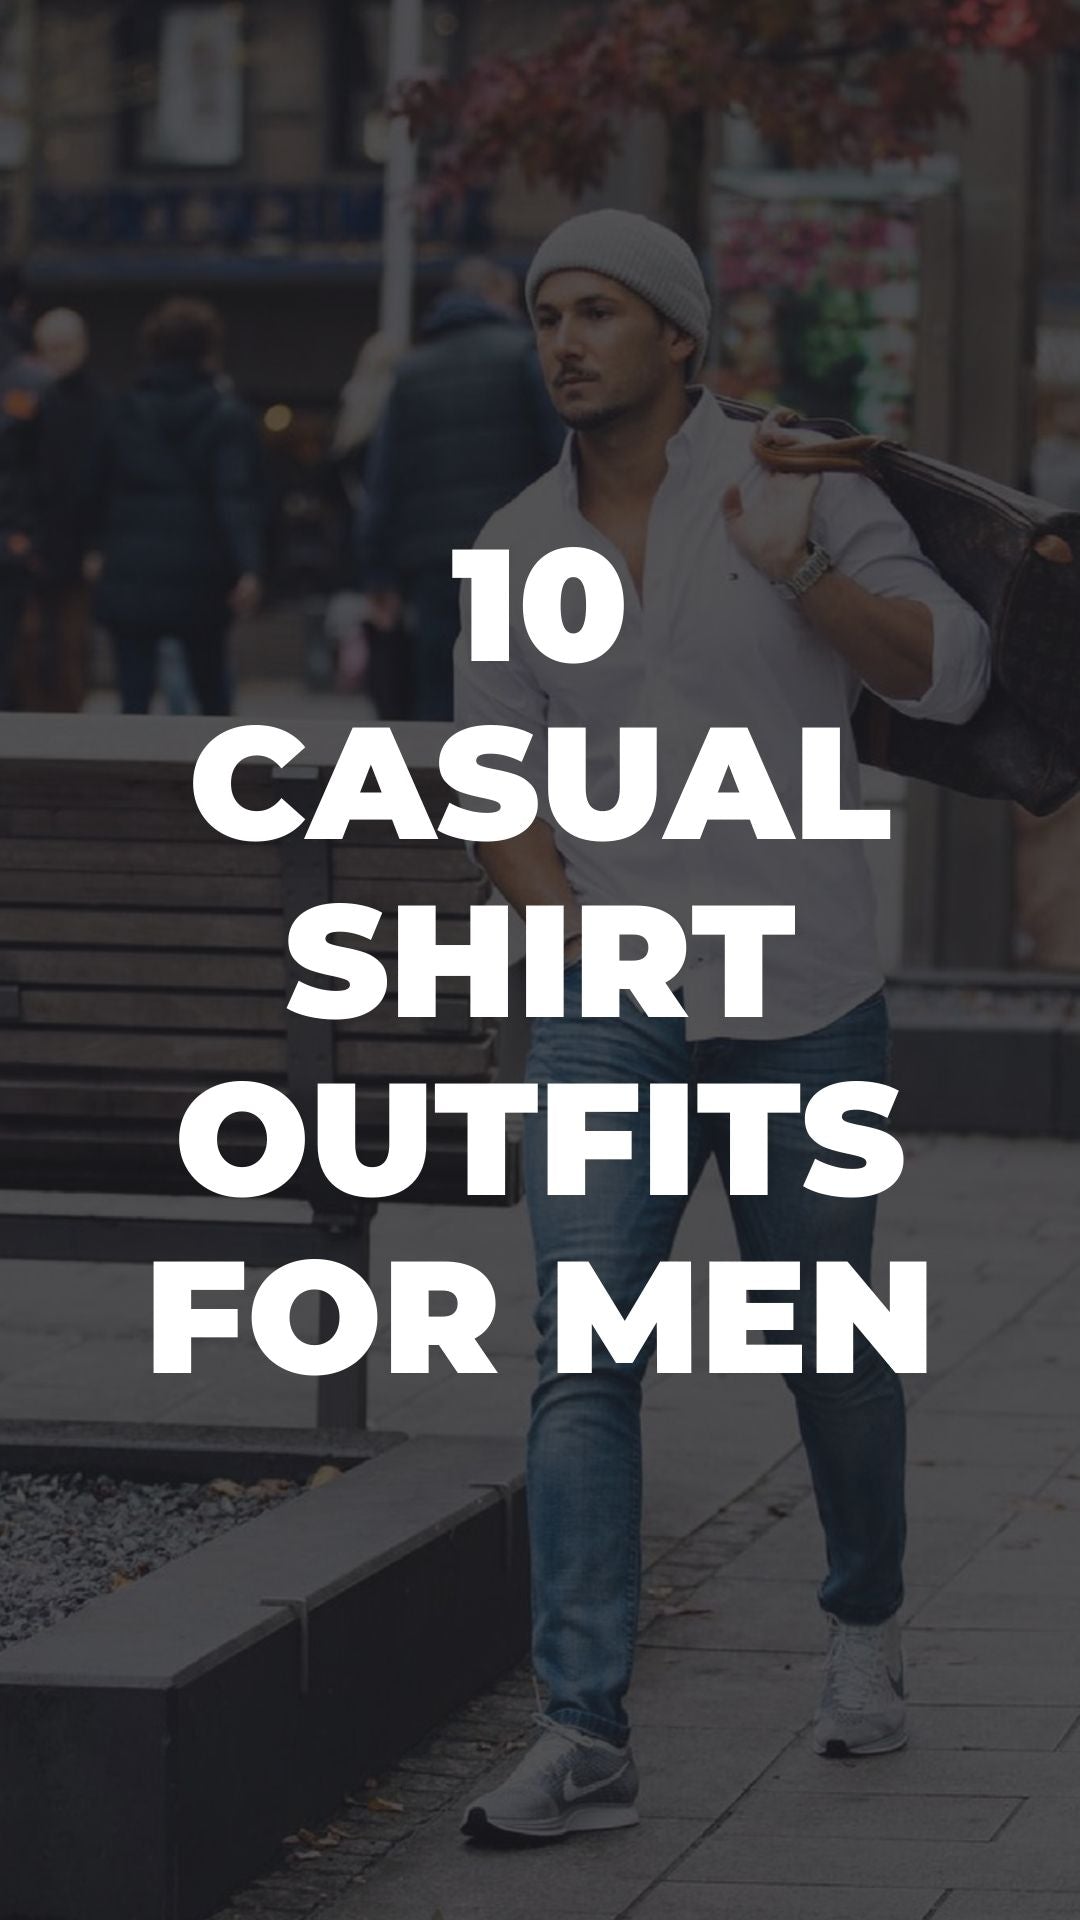 10 Casual Shirt Outfits For Men